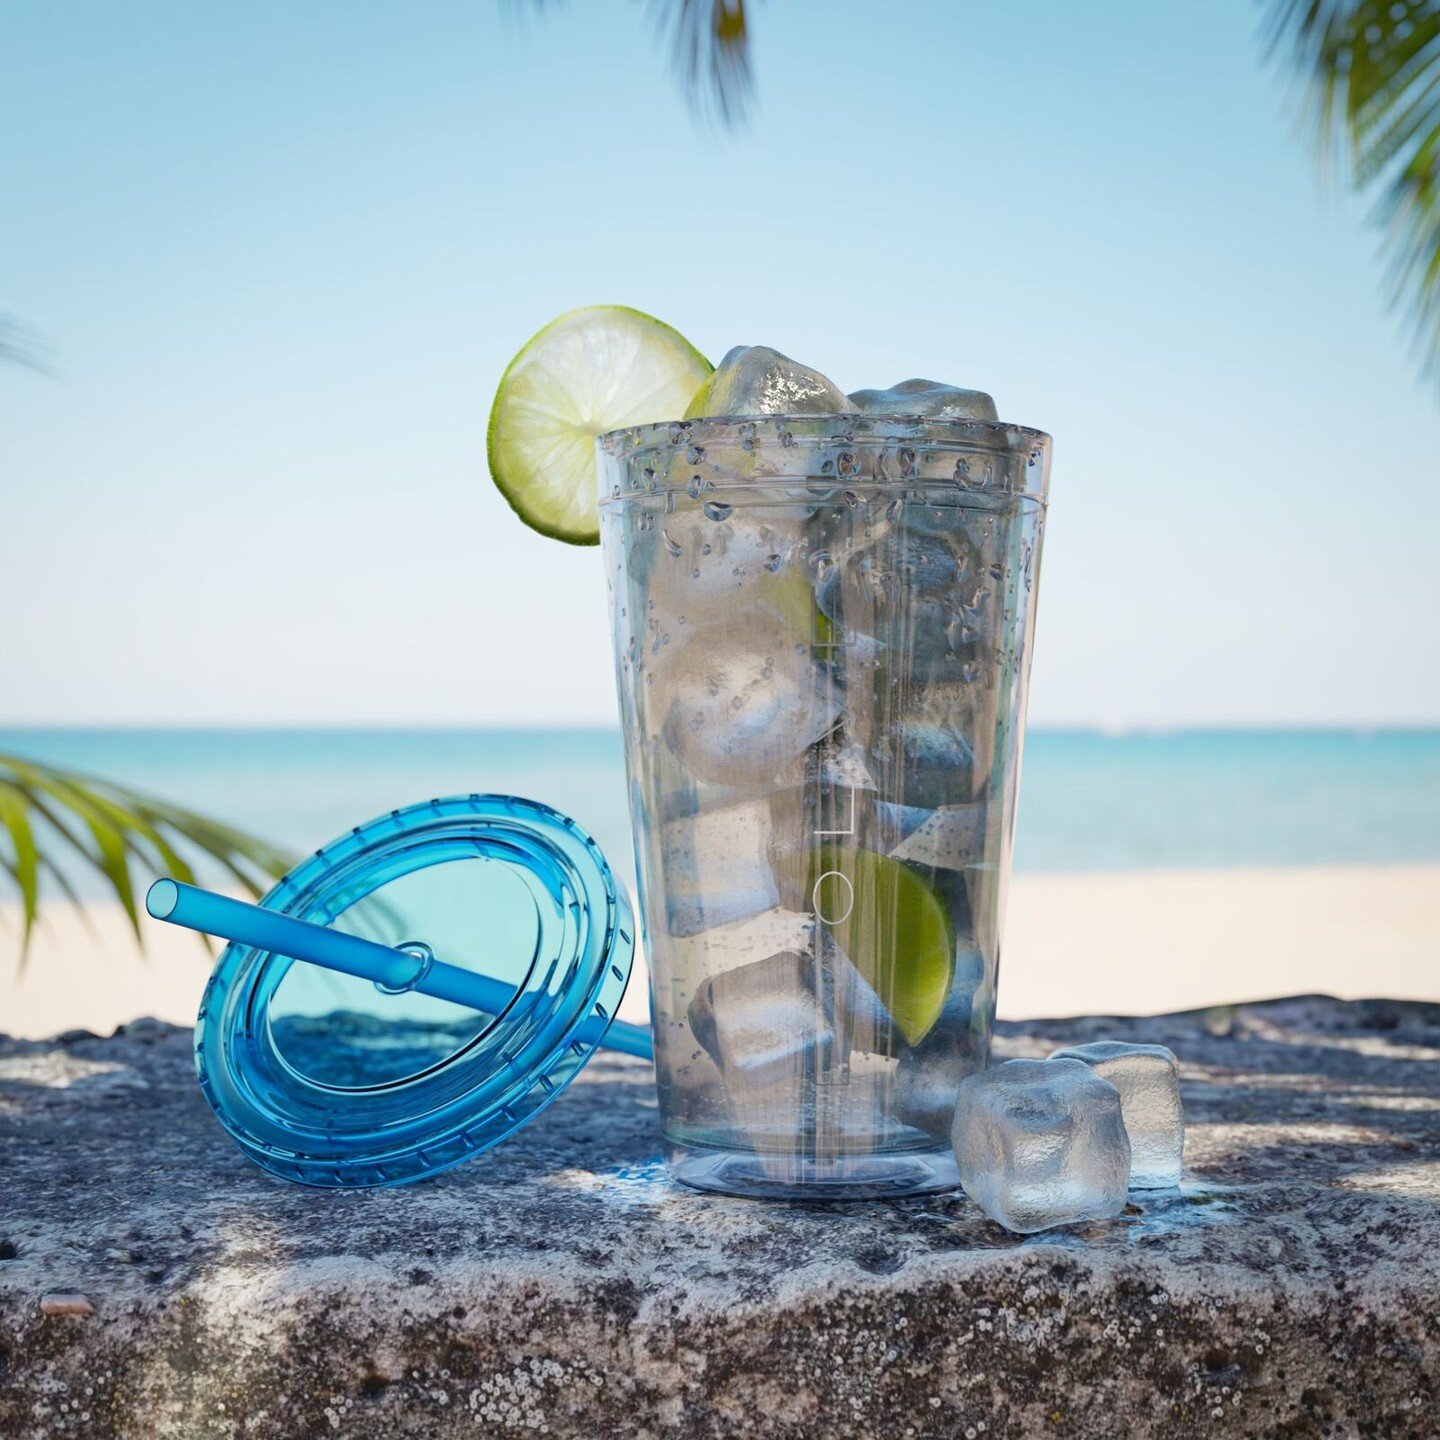 Explore the 11 different colors of our sunsplash tumblers. They're made from acrylic &ndash; they're more durable than glass alternatives. These tumblers come with a color-matching lid and straw to create a sleek, put-together look. The straw will la